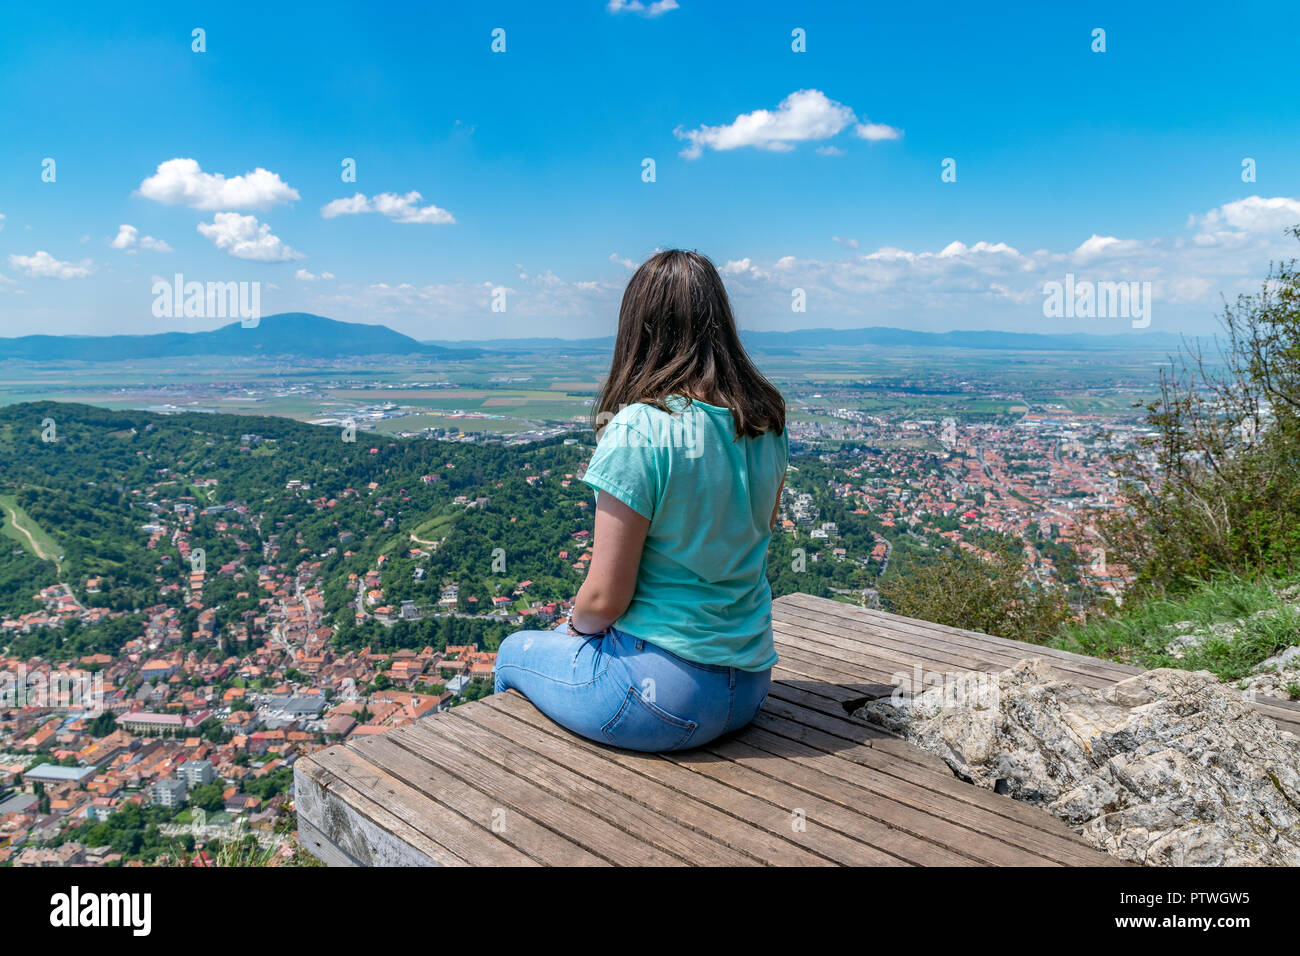 Girl admiring the overview of Brasov city from Tampa mountain in Brasov, Romania. Stock Photo